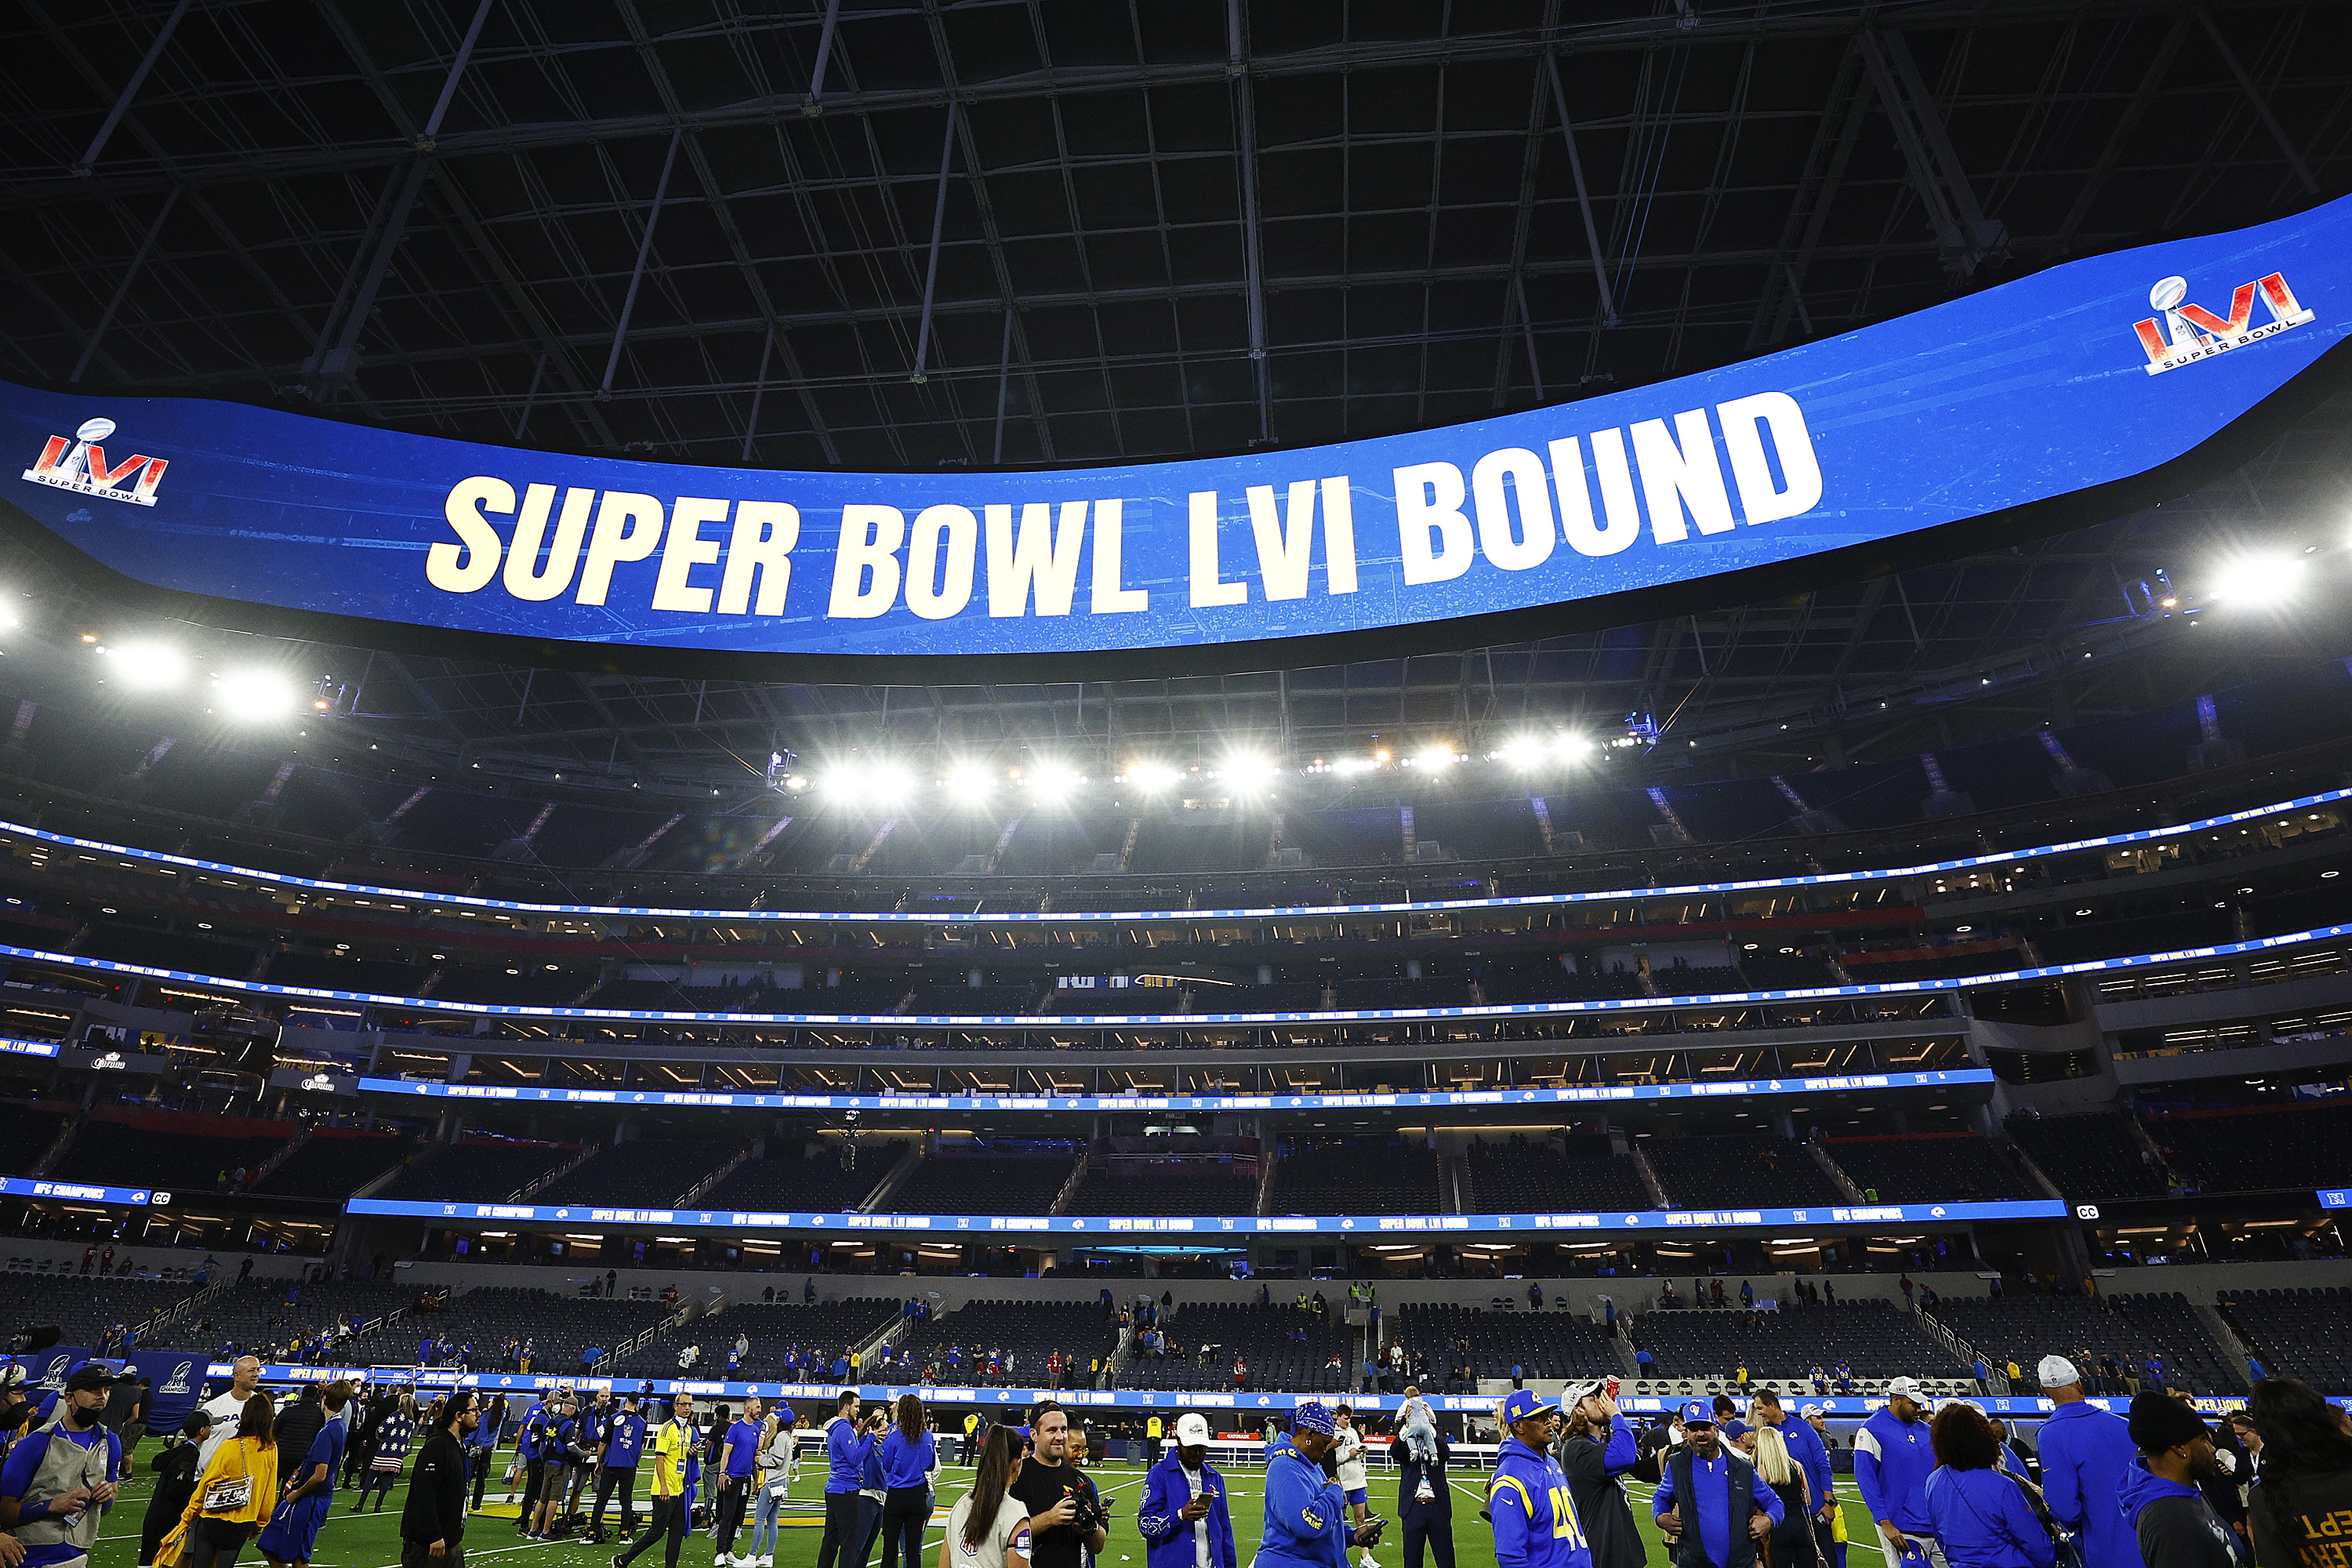 A blue banner at the SoFi stadium in Los Angeles reads “Super Bowl LVI Bound”